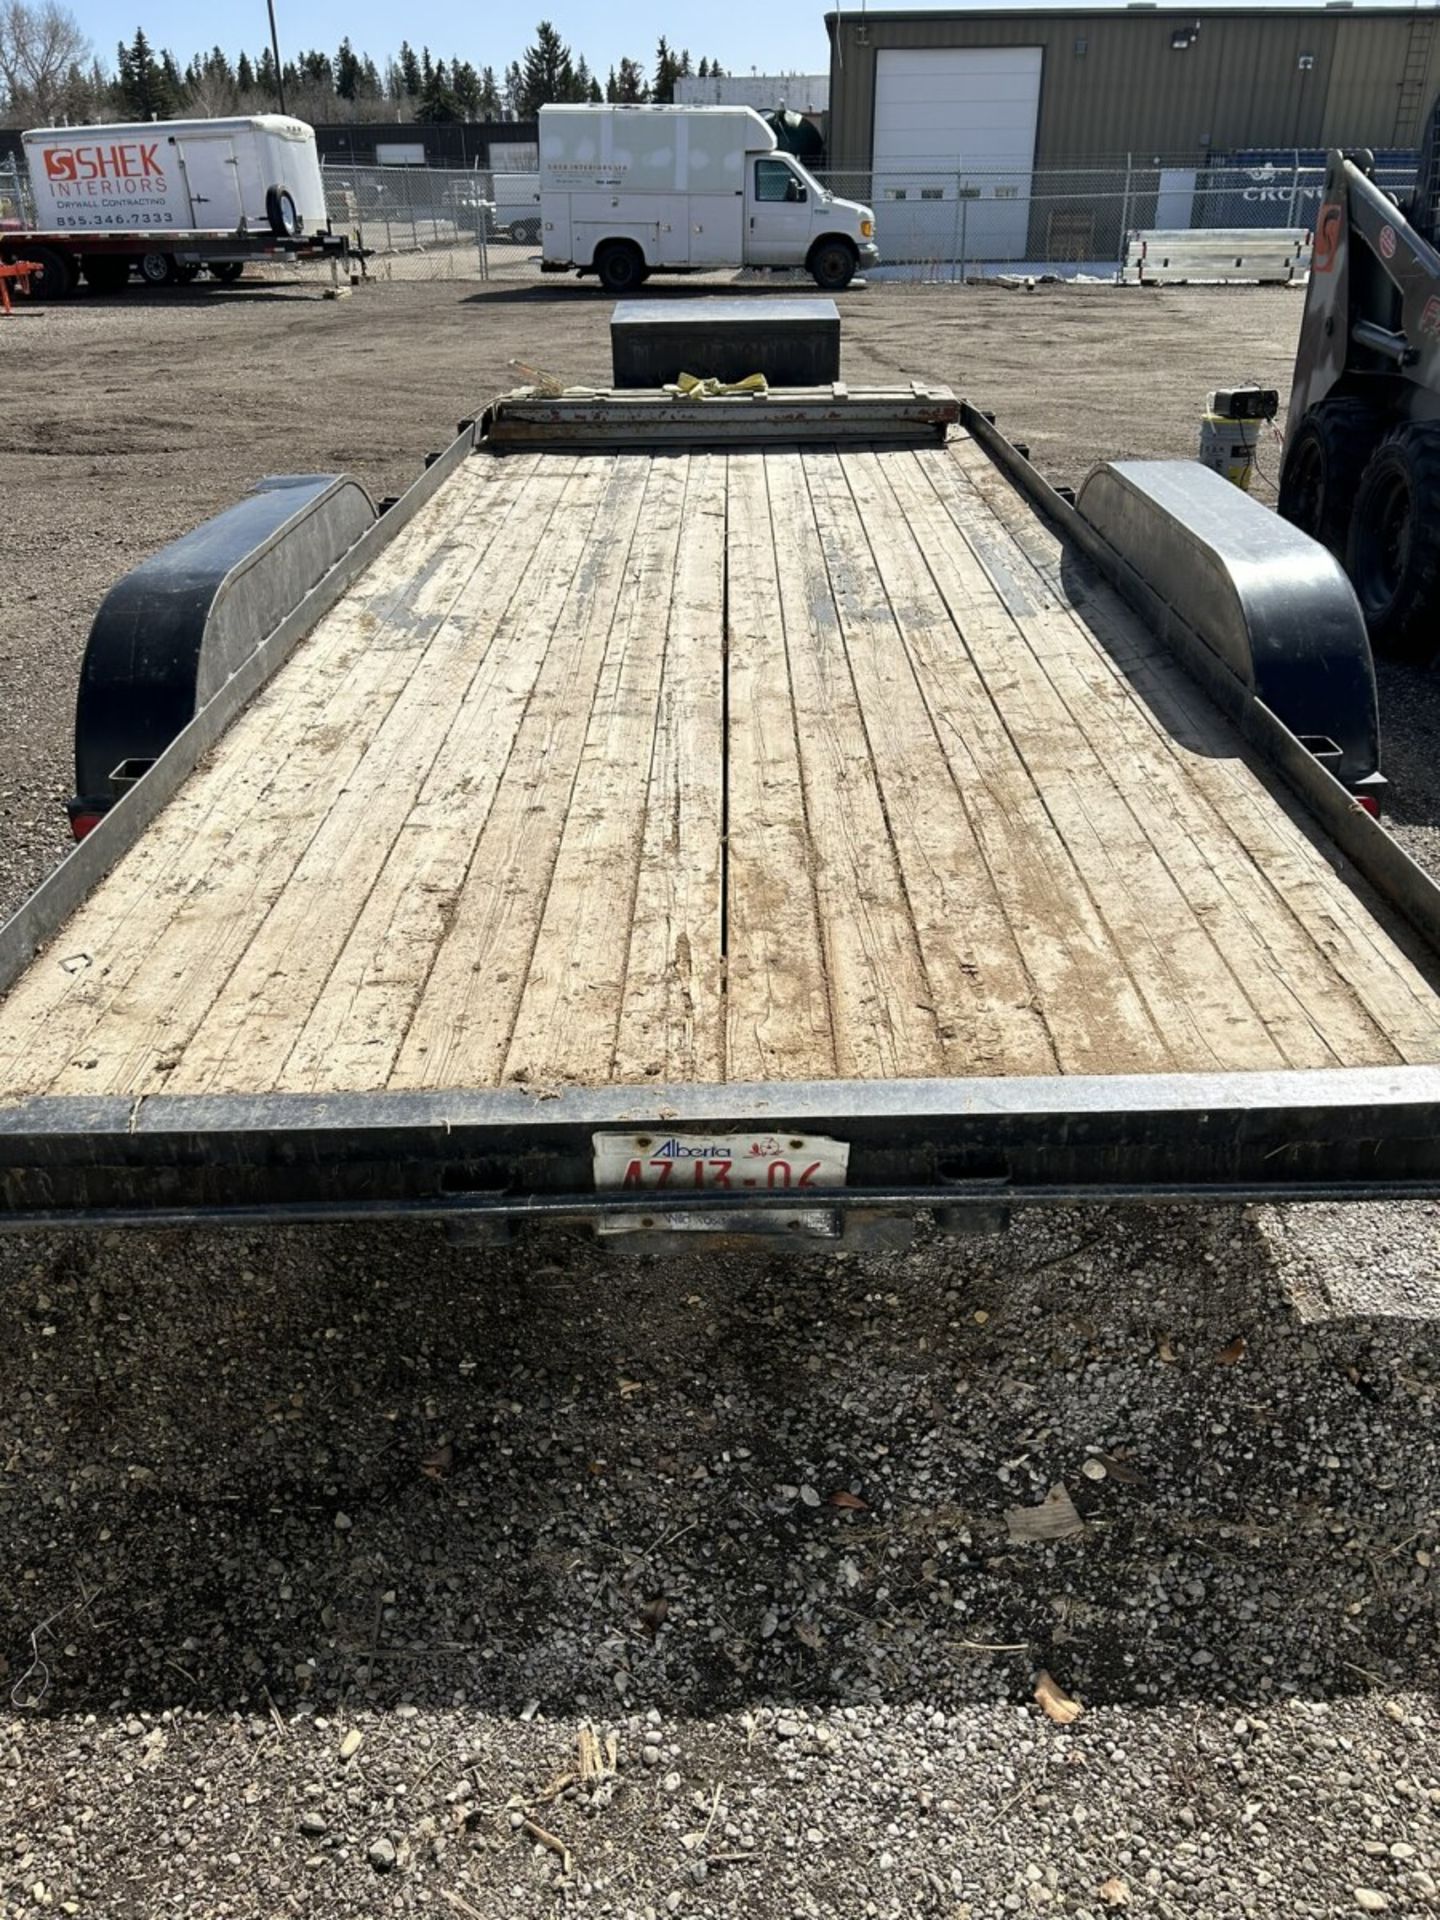 16 FT X 6.5 FT EQUIPMENT FLAT DECK TRAILER, T/A, W/ RAMPS - Image 11 of 11